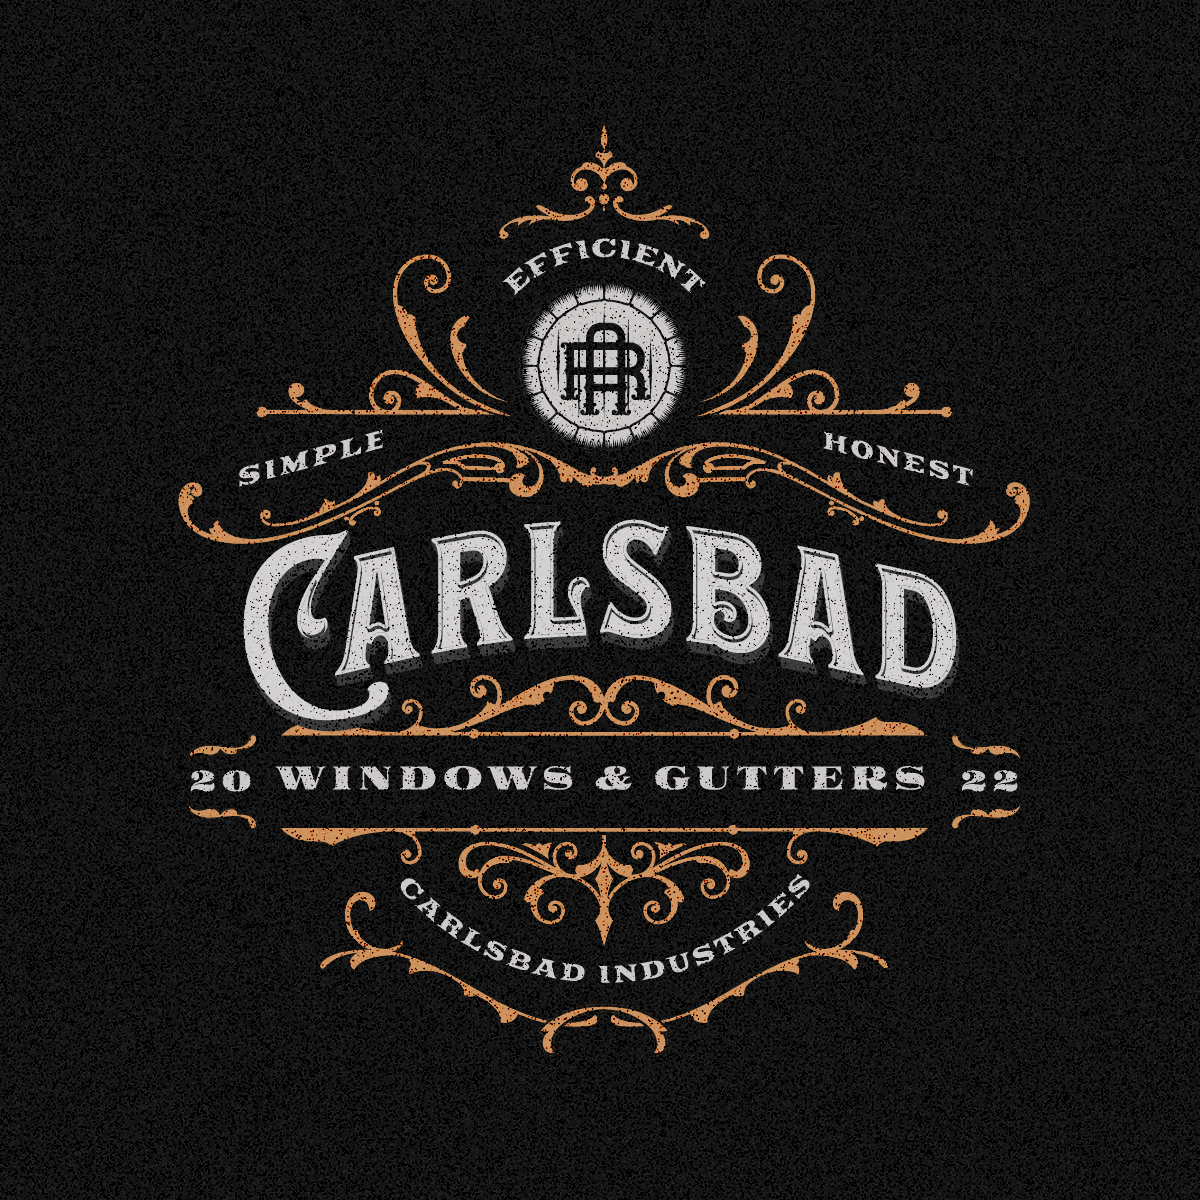 Carlsbad Windows and Gutters Logo